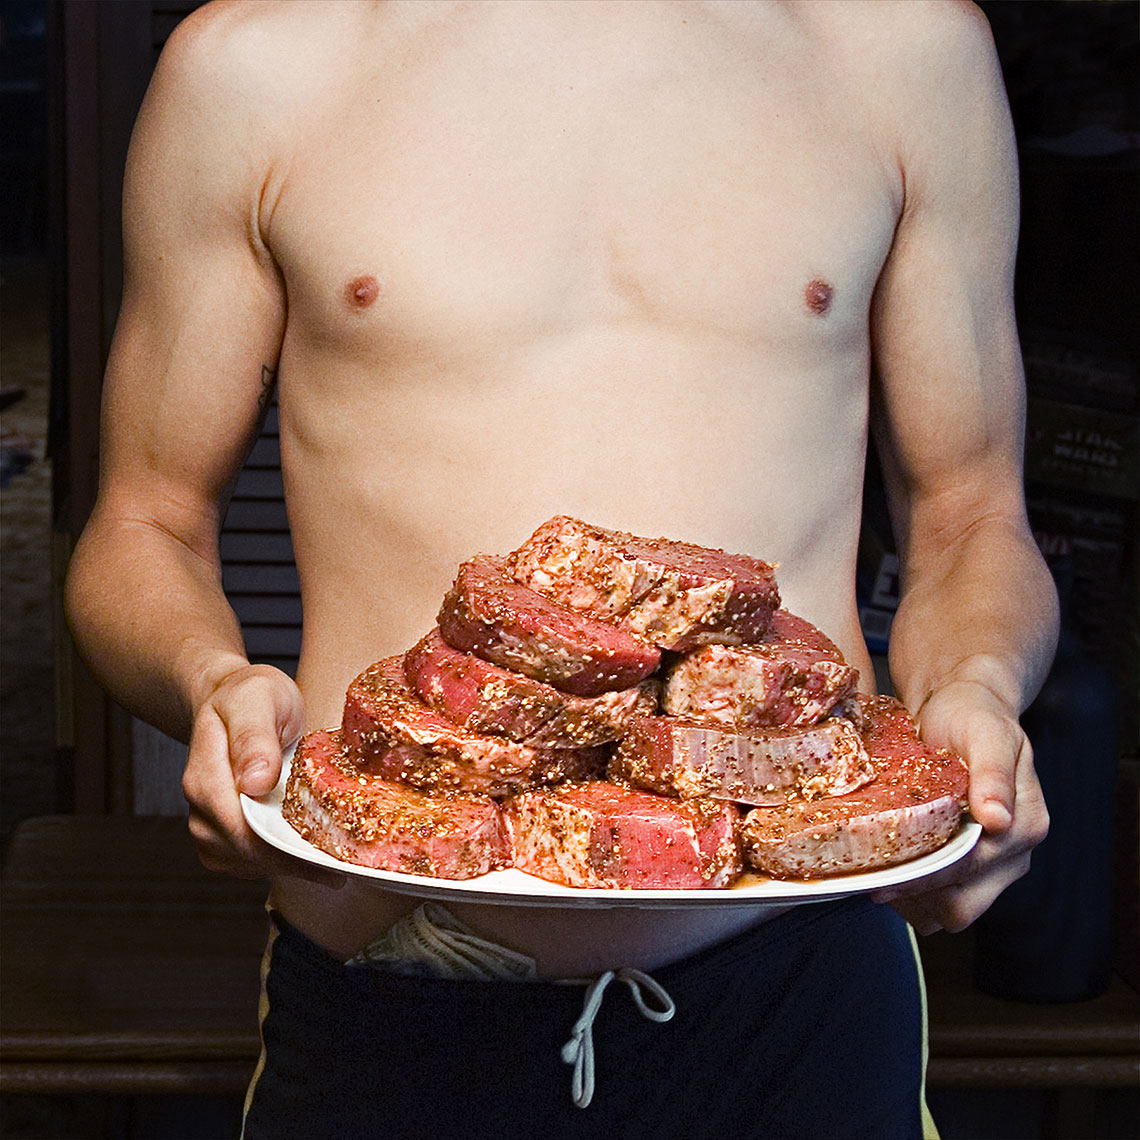 Meat on the plate held by a shirtless guy